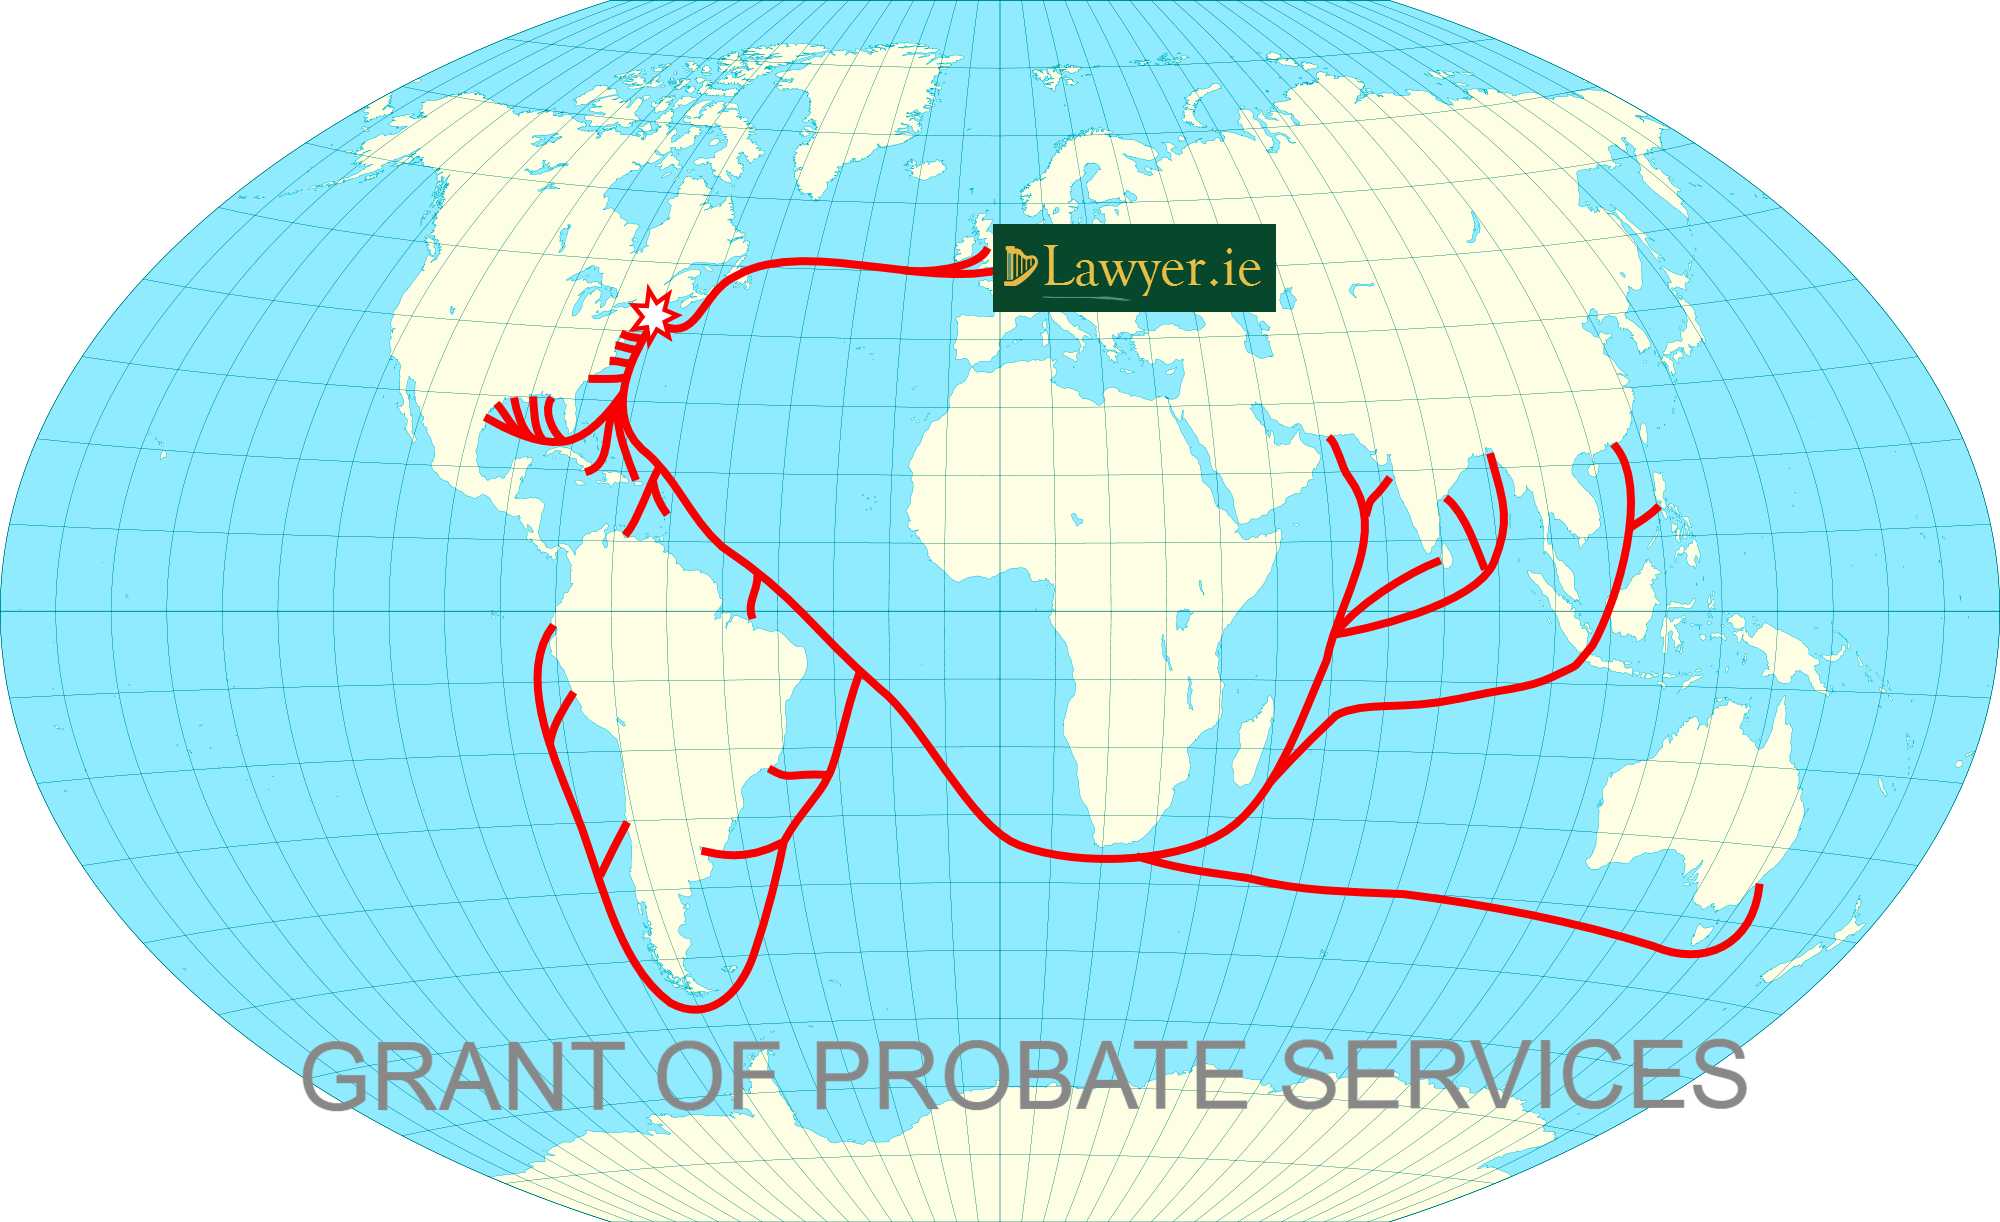 Global Grant of Probate Services